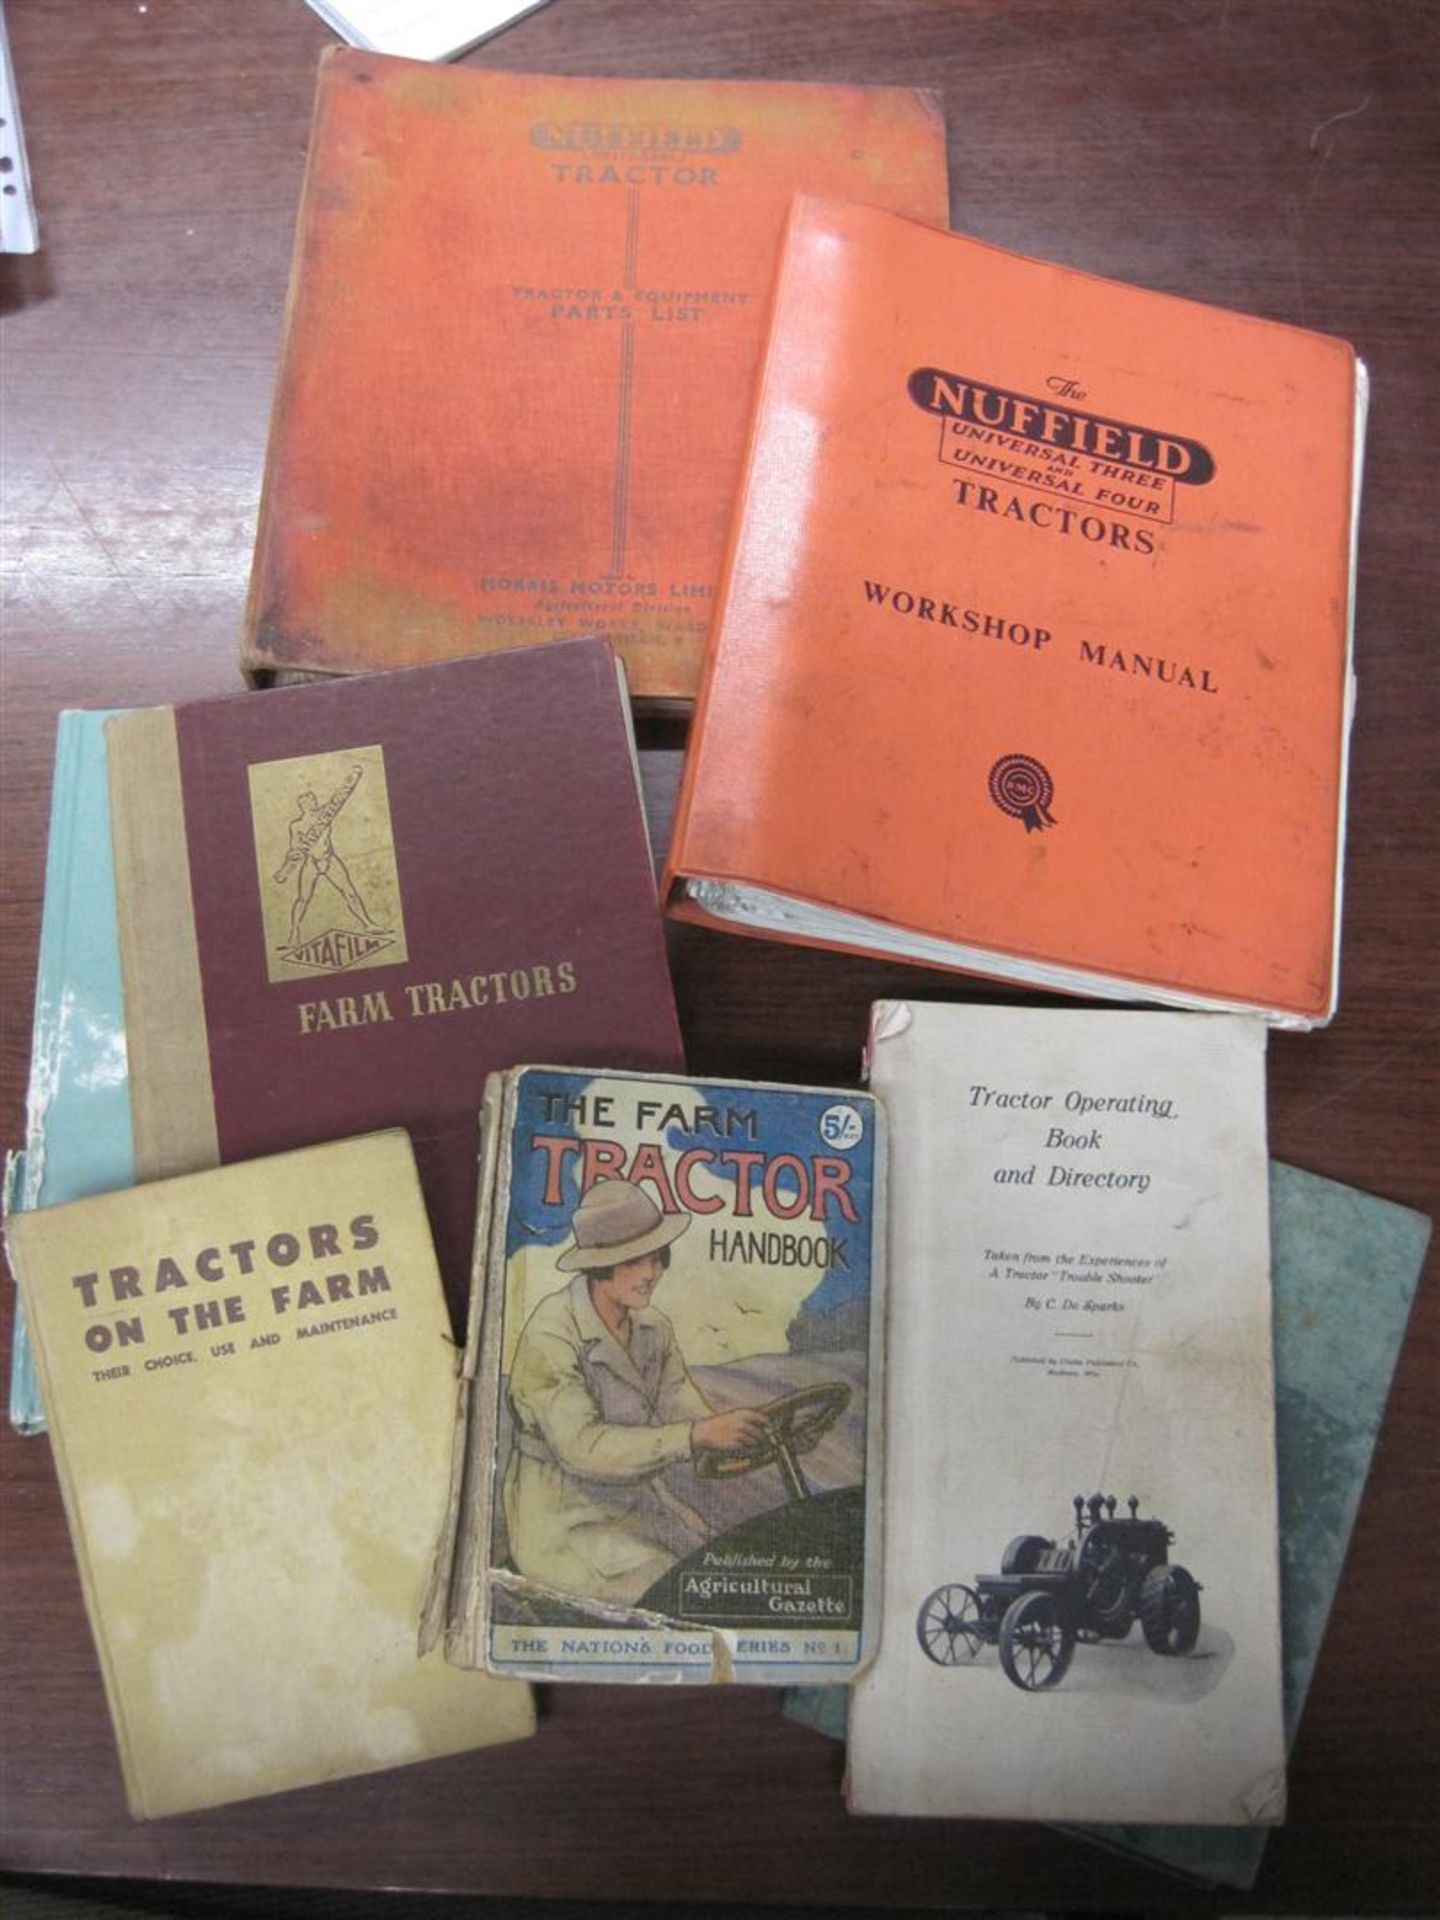 Nuffield Universal 3 & 4 workshop manuals t/w a parts list and a quantity of other books on farm